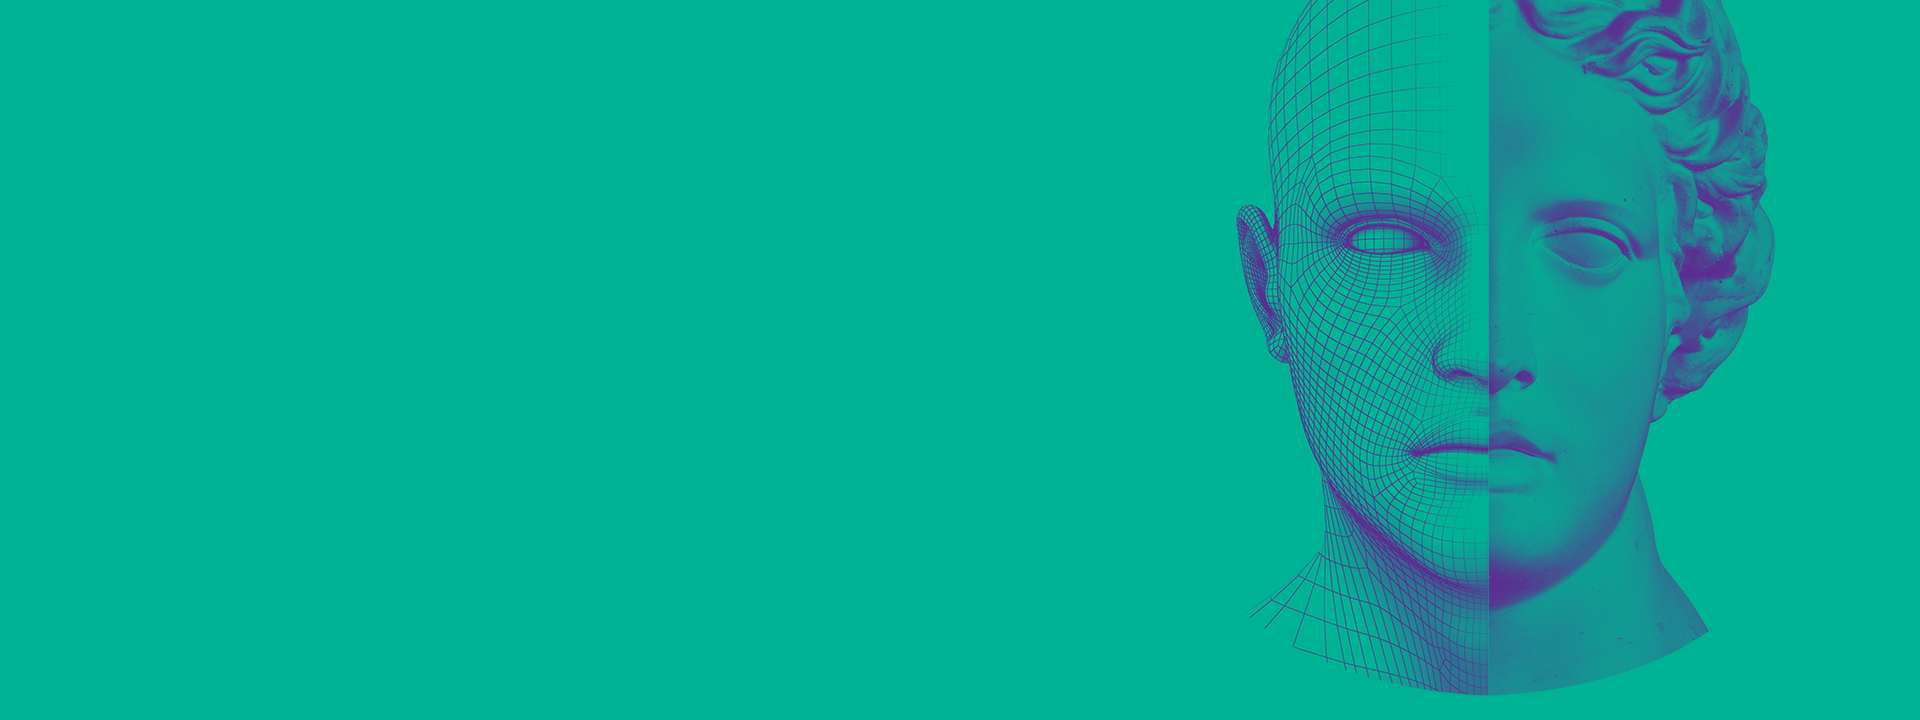 Portrait on green background, header for New England Machine Learning Day event page